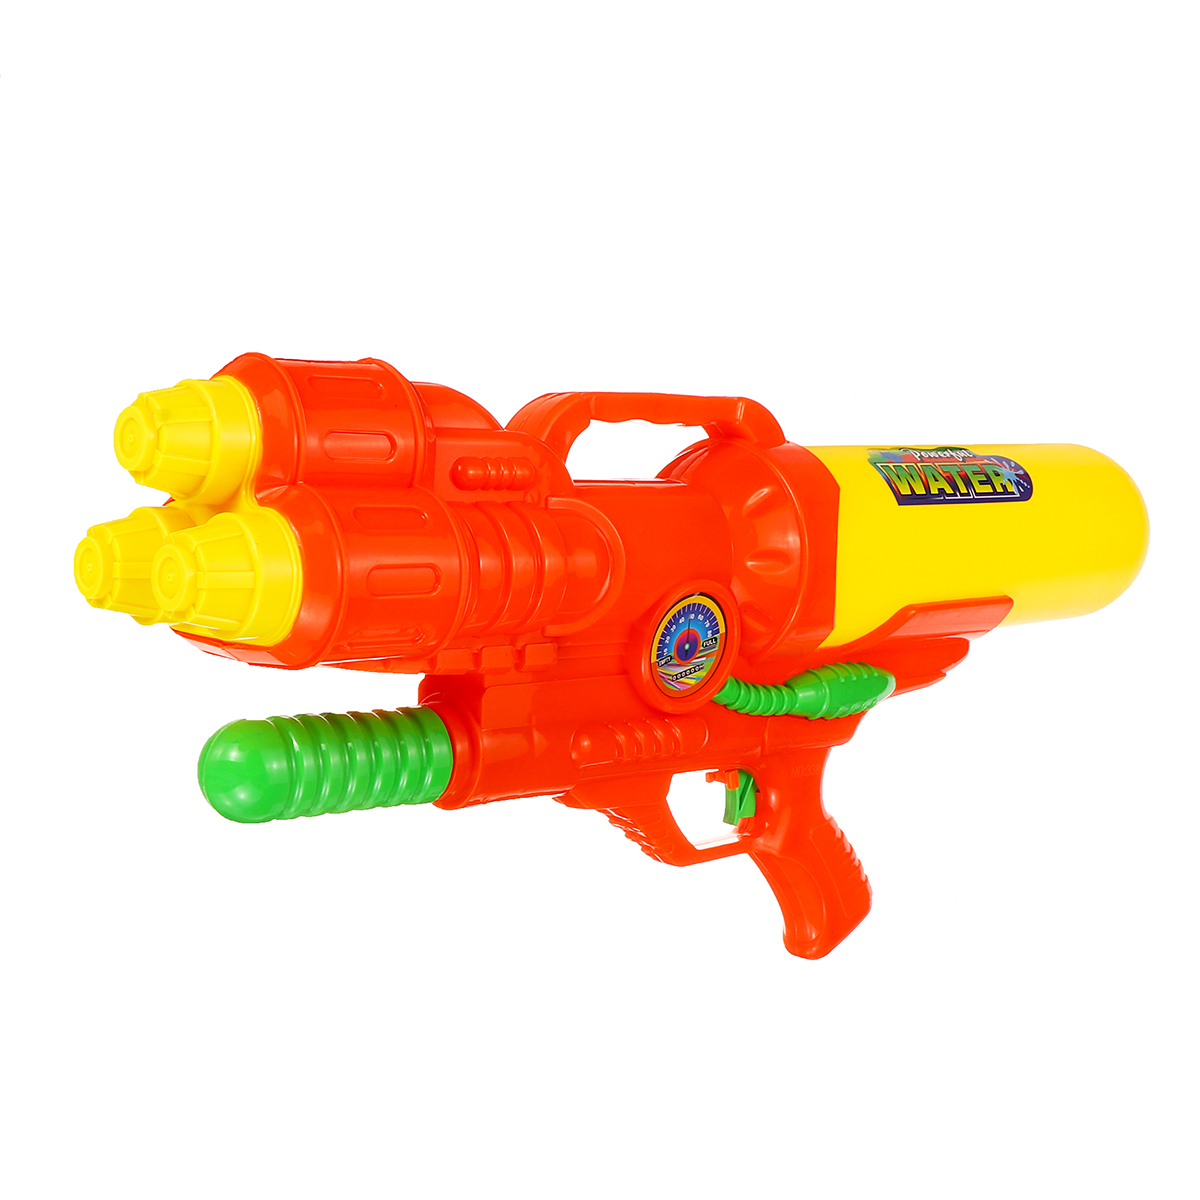 1500ml-Red-Or-Blue-Toy-Water-Sprinkler-With-A-Range-Of-7-9m-Plastic-Water-Sprinkler-For-Children-Bea-1703042-14